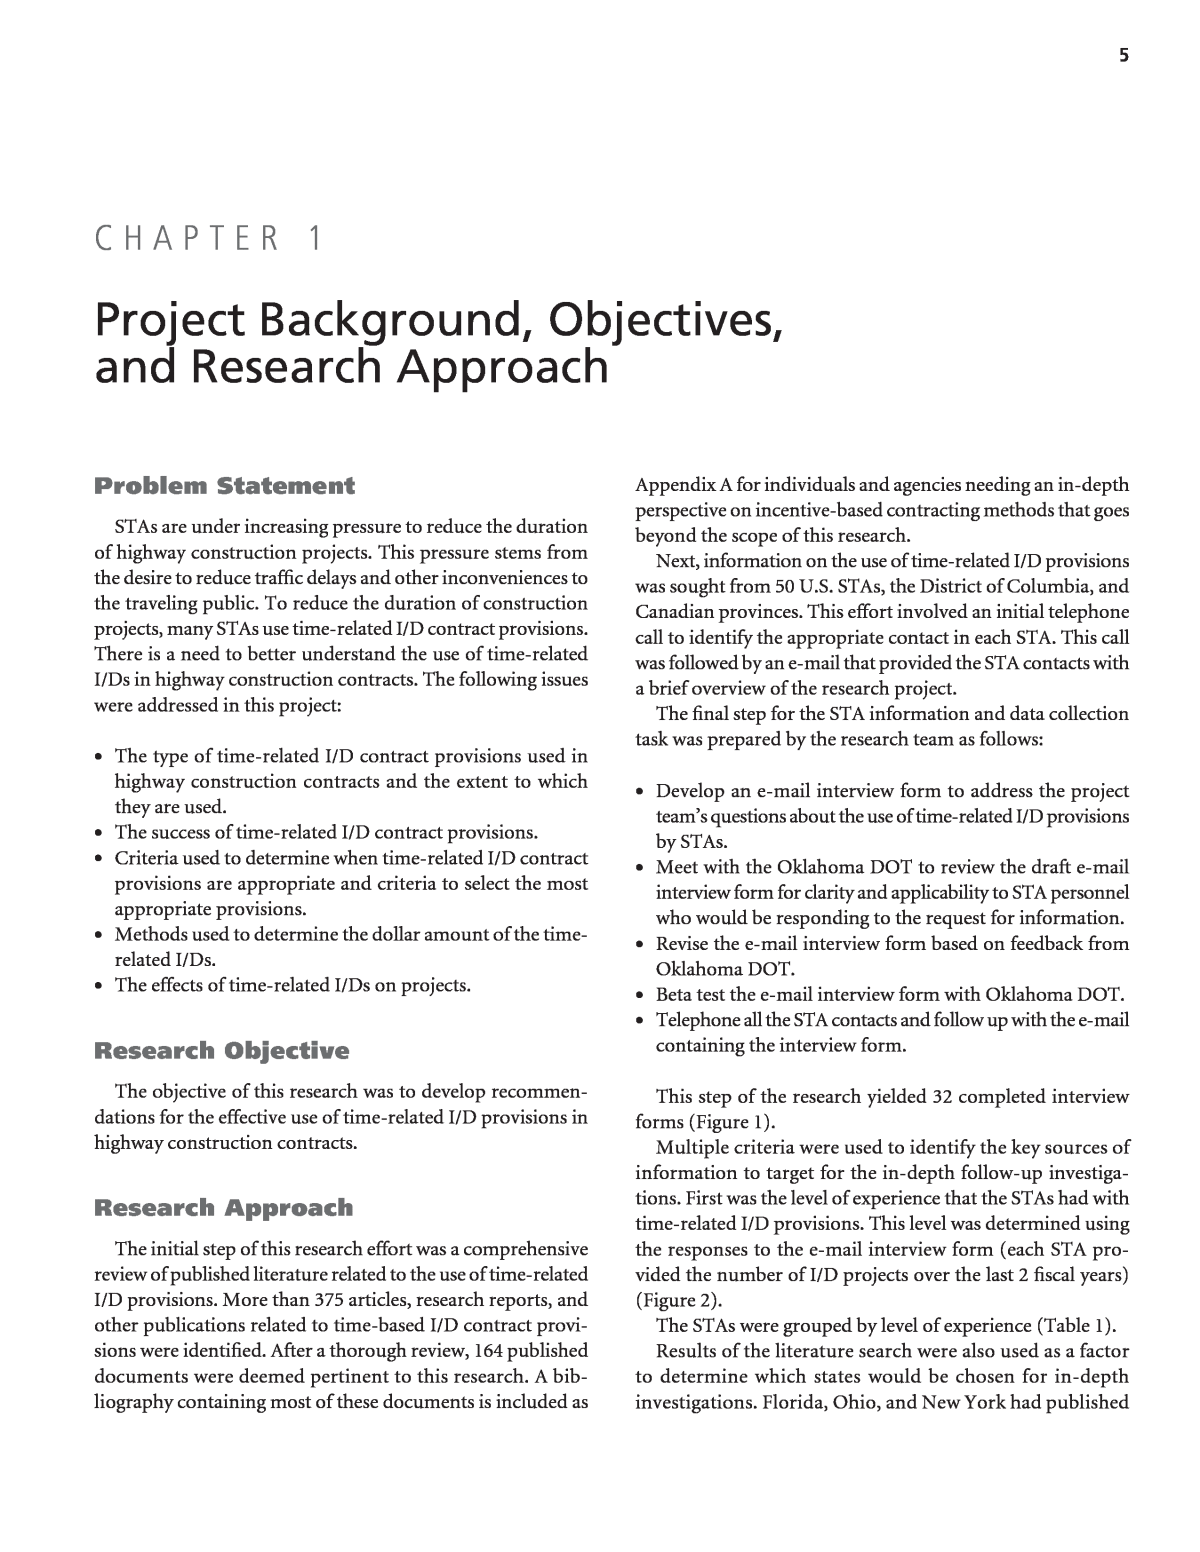 Chapter 1 - Project Background, Objectives, and Research Approach ...